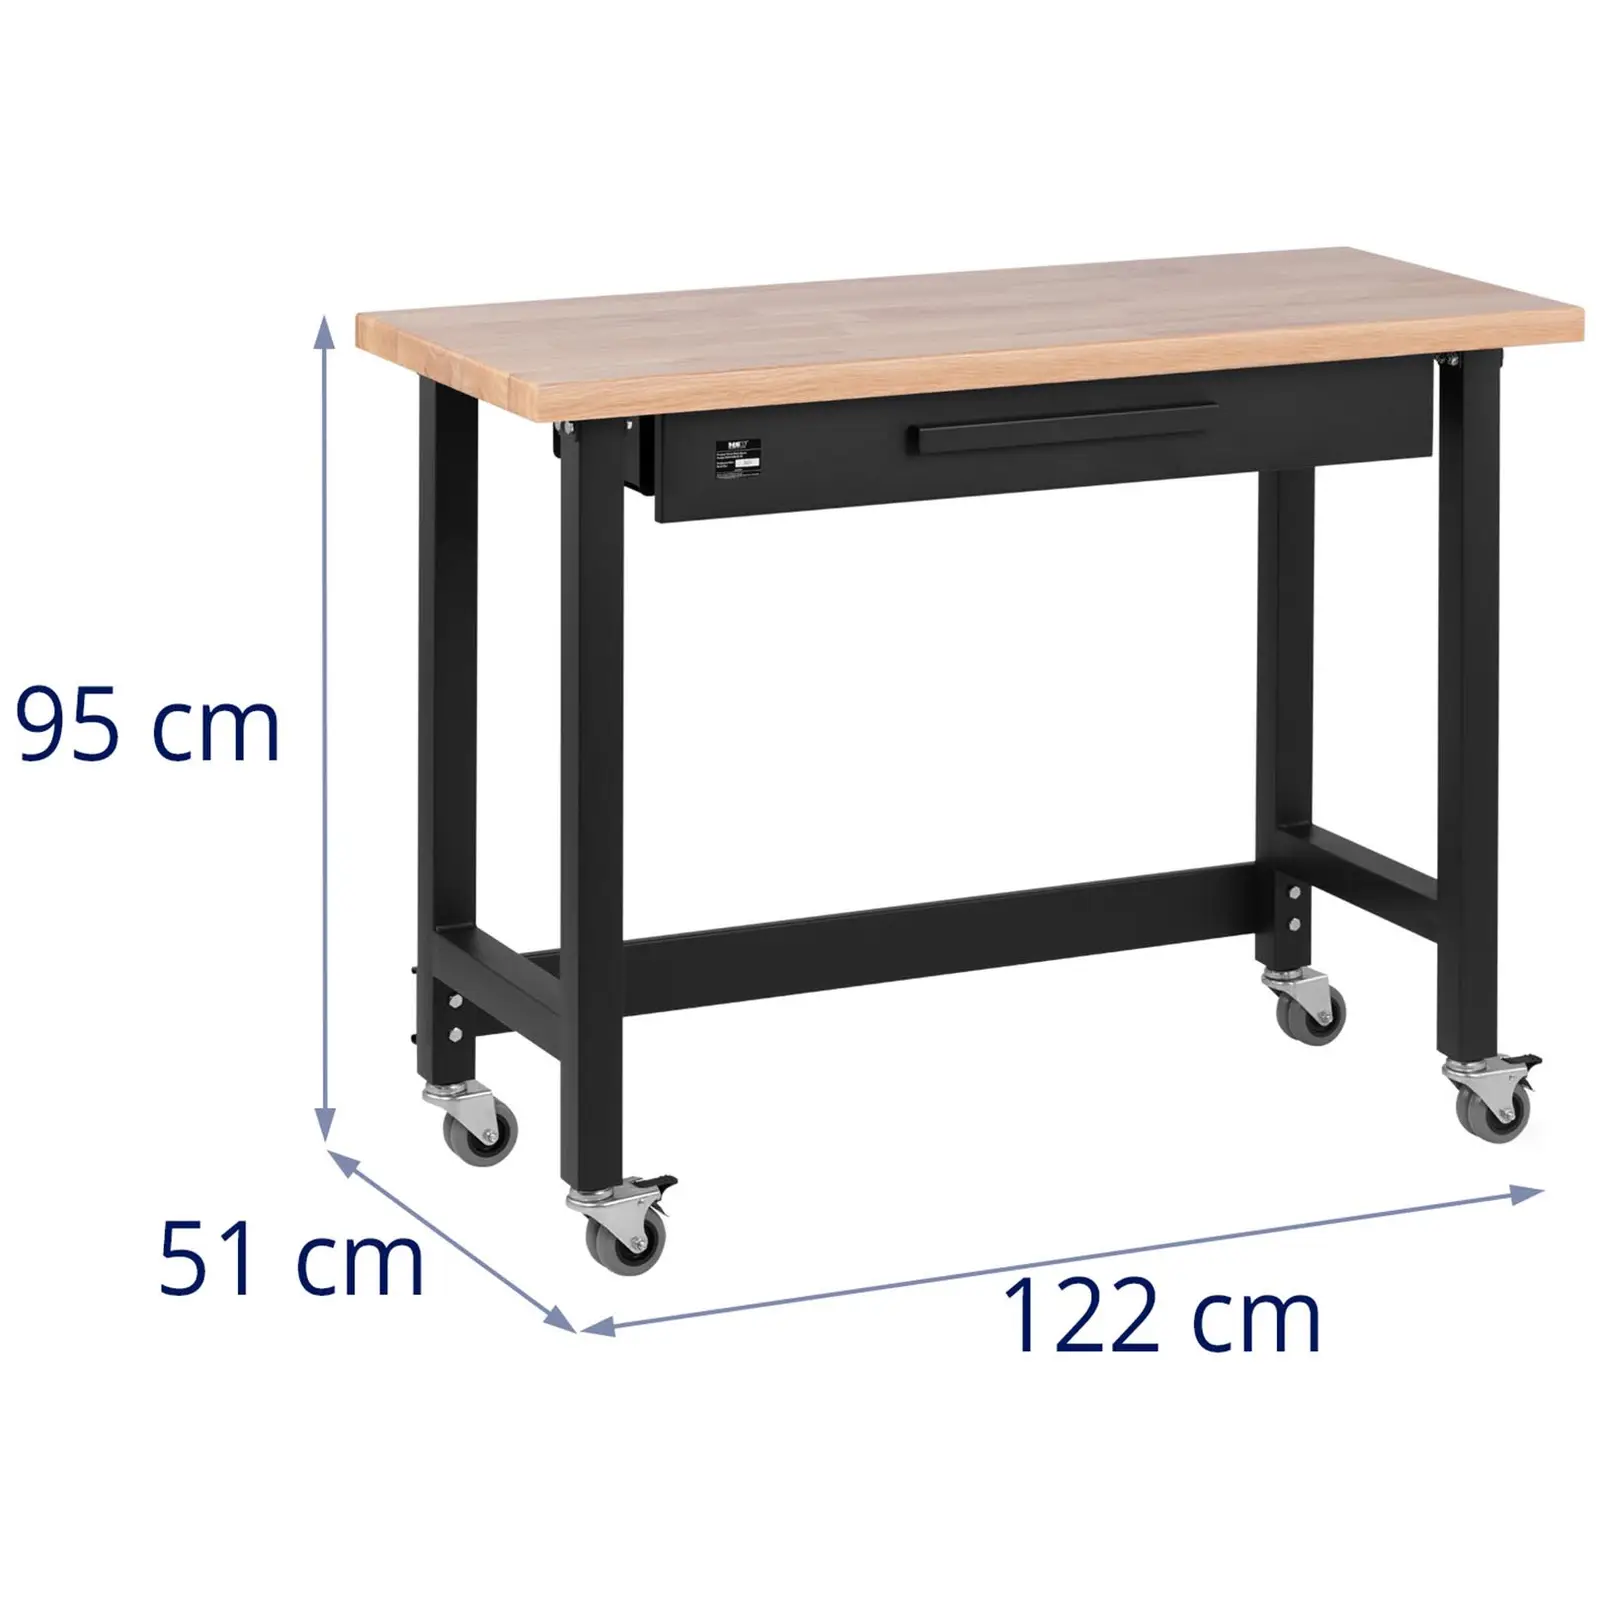 Workbench - 122 x 51 cm - height adjustable 95 cm - 227 kg - with drawer - mobile